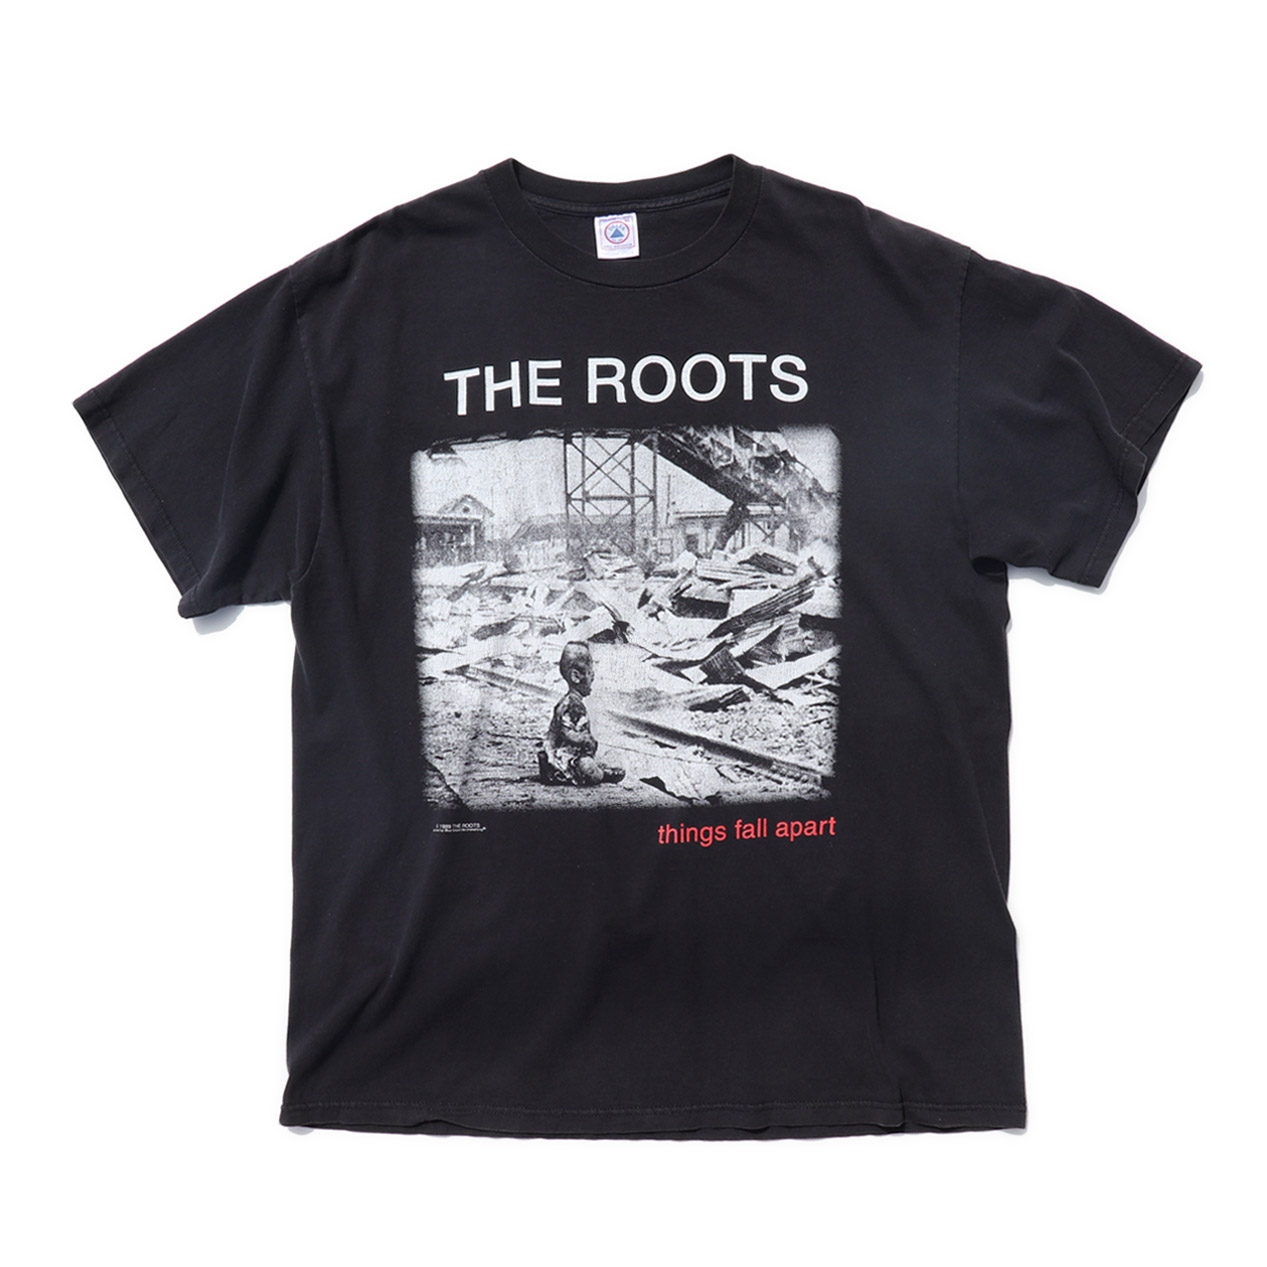 THE ROOTS things fall apart Tシャツ vintage - lapbm.org